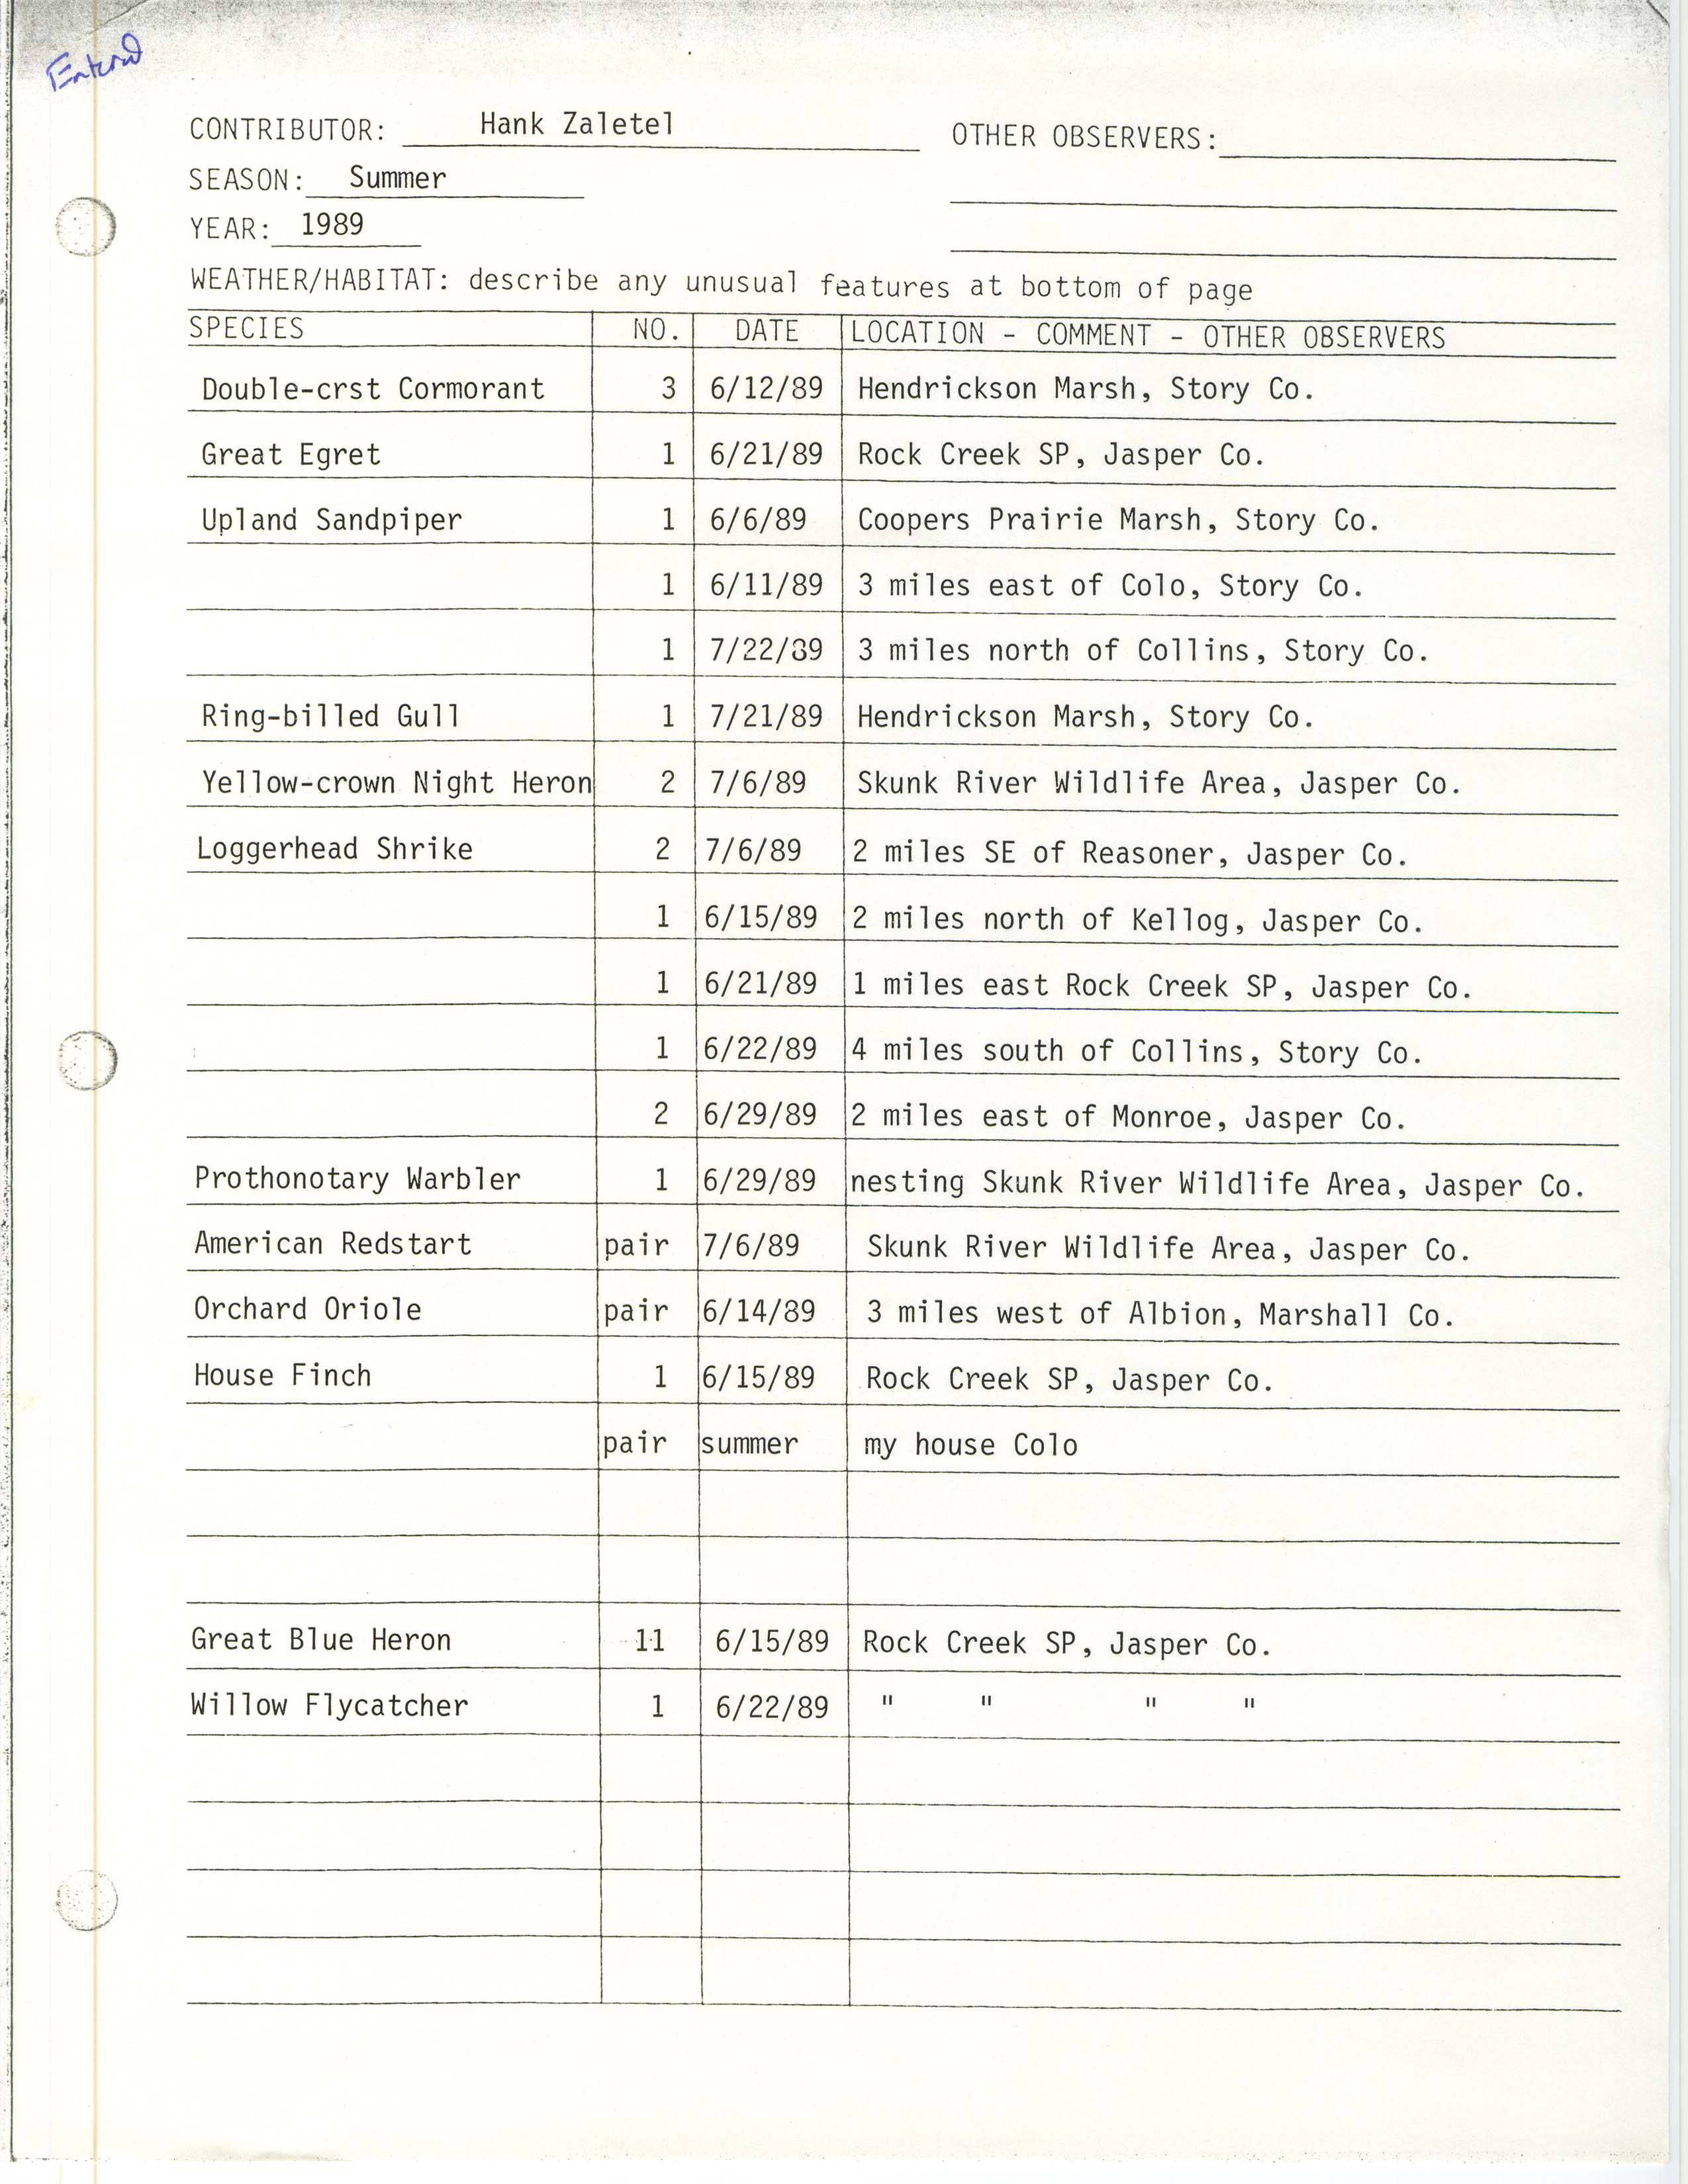 Field notes contributed by Hank Zaletel, summer 1989